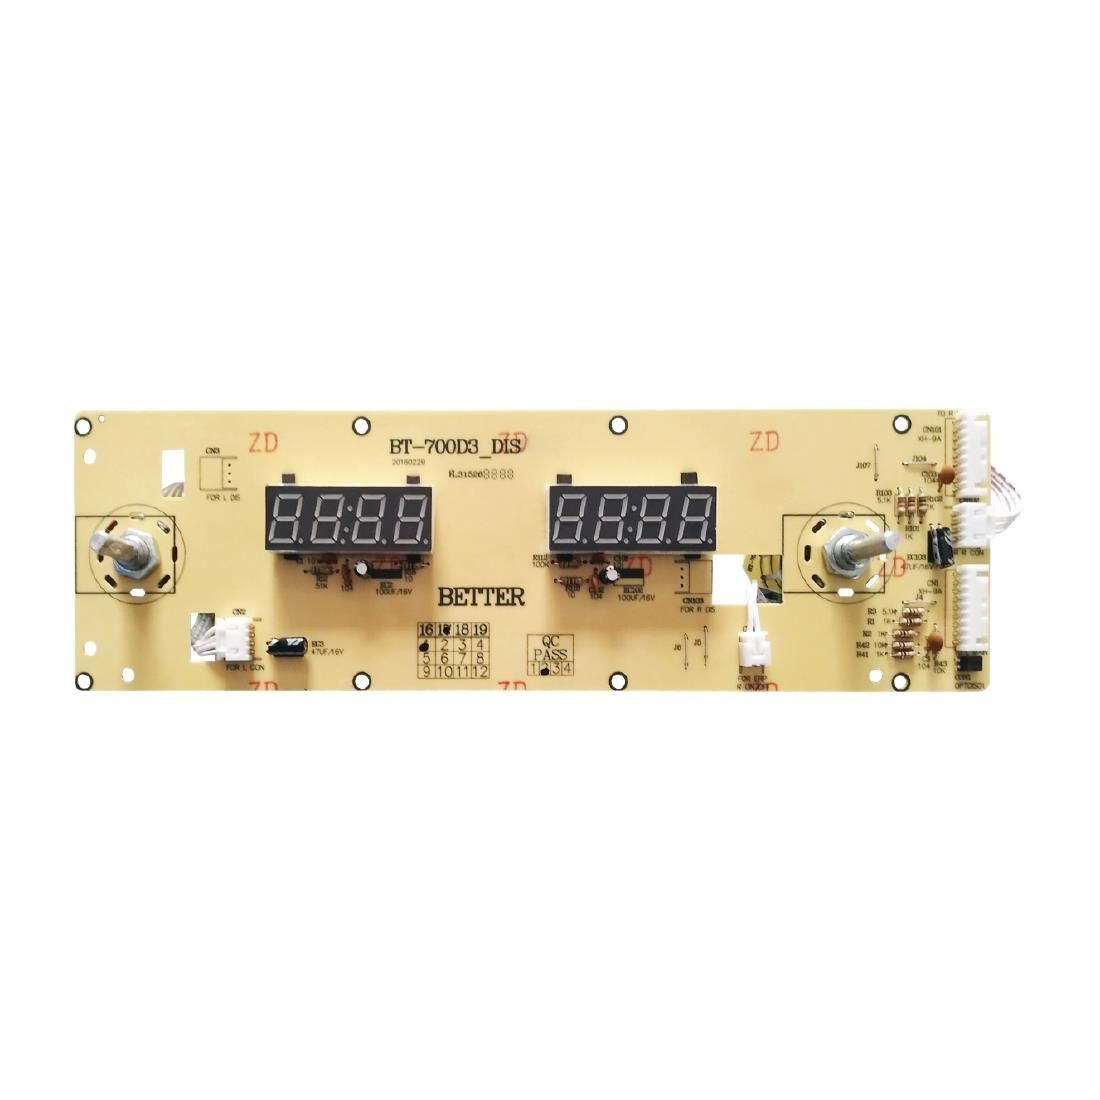 AH022 Buffalo PCB for Control Panel JD Catering Equipment Solutions Ltd